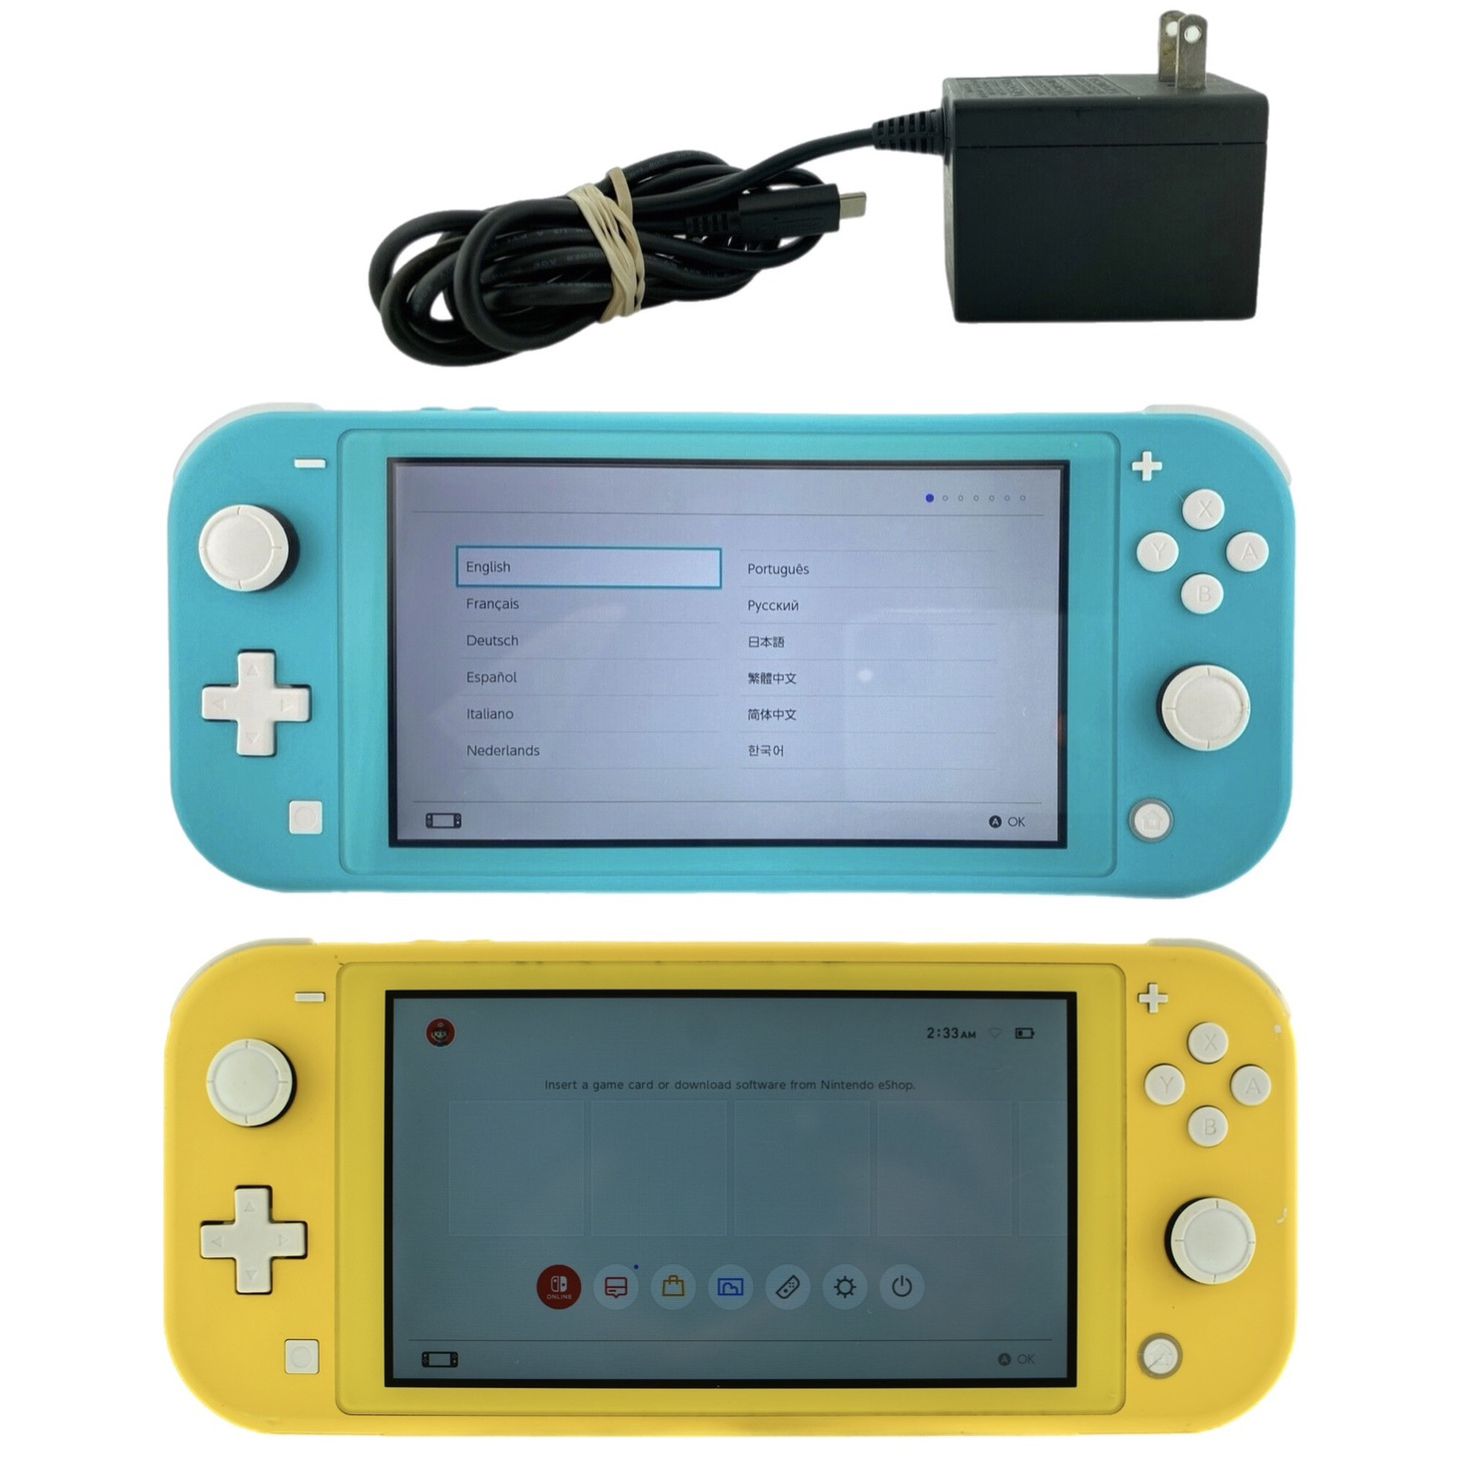 Nintendo Switch Lite Video Game Console Turquoise with Charger and Yellow Handheld System HDH-001 - PRICE FOR EACH READ IN DESCRIPTION